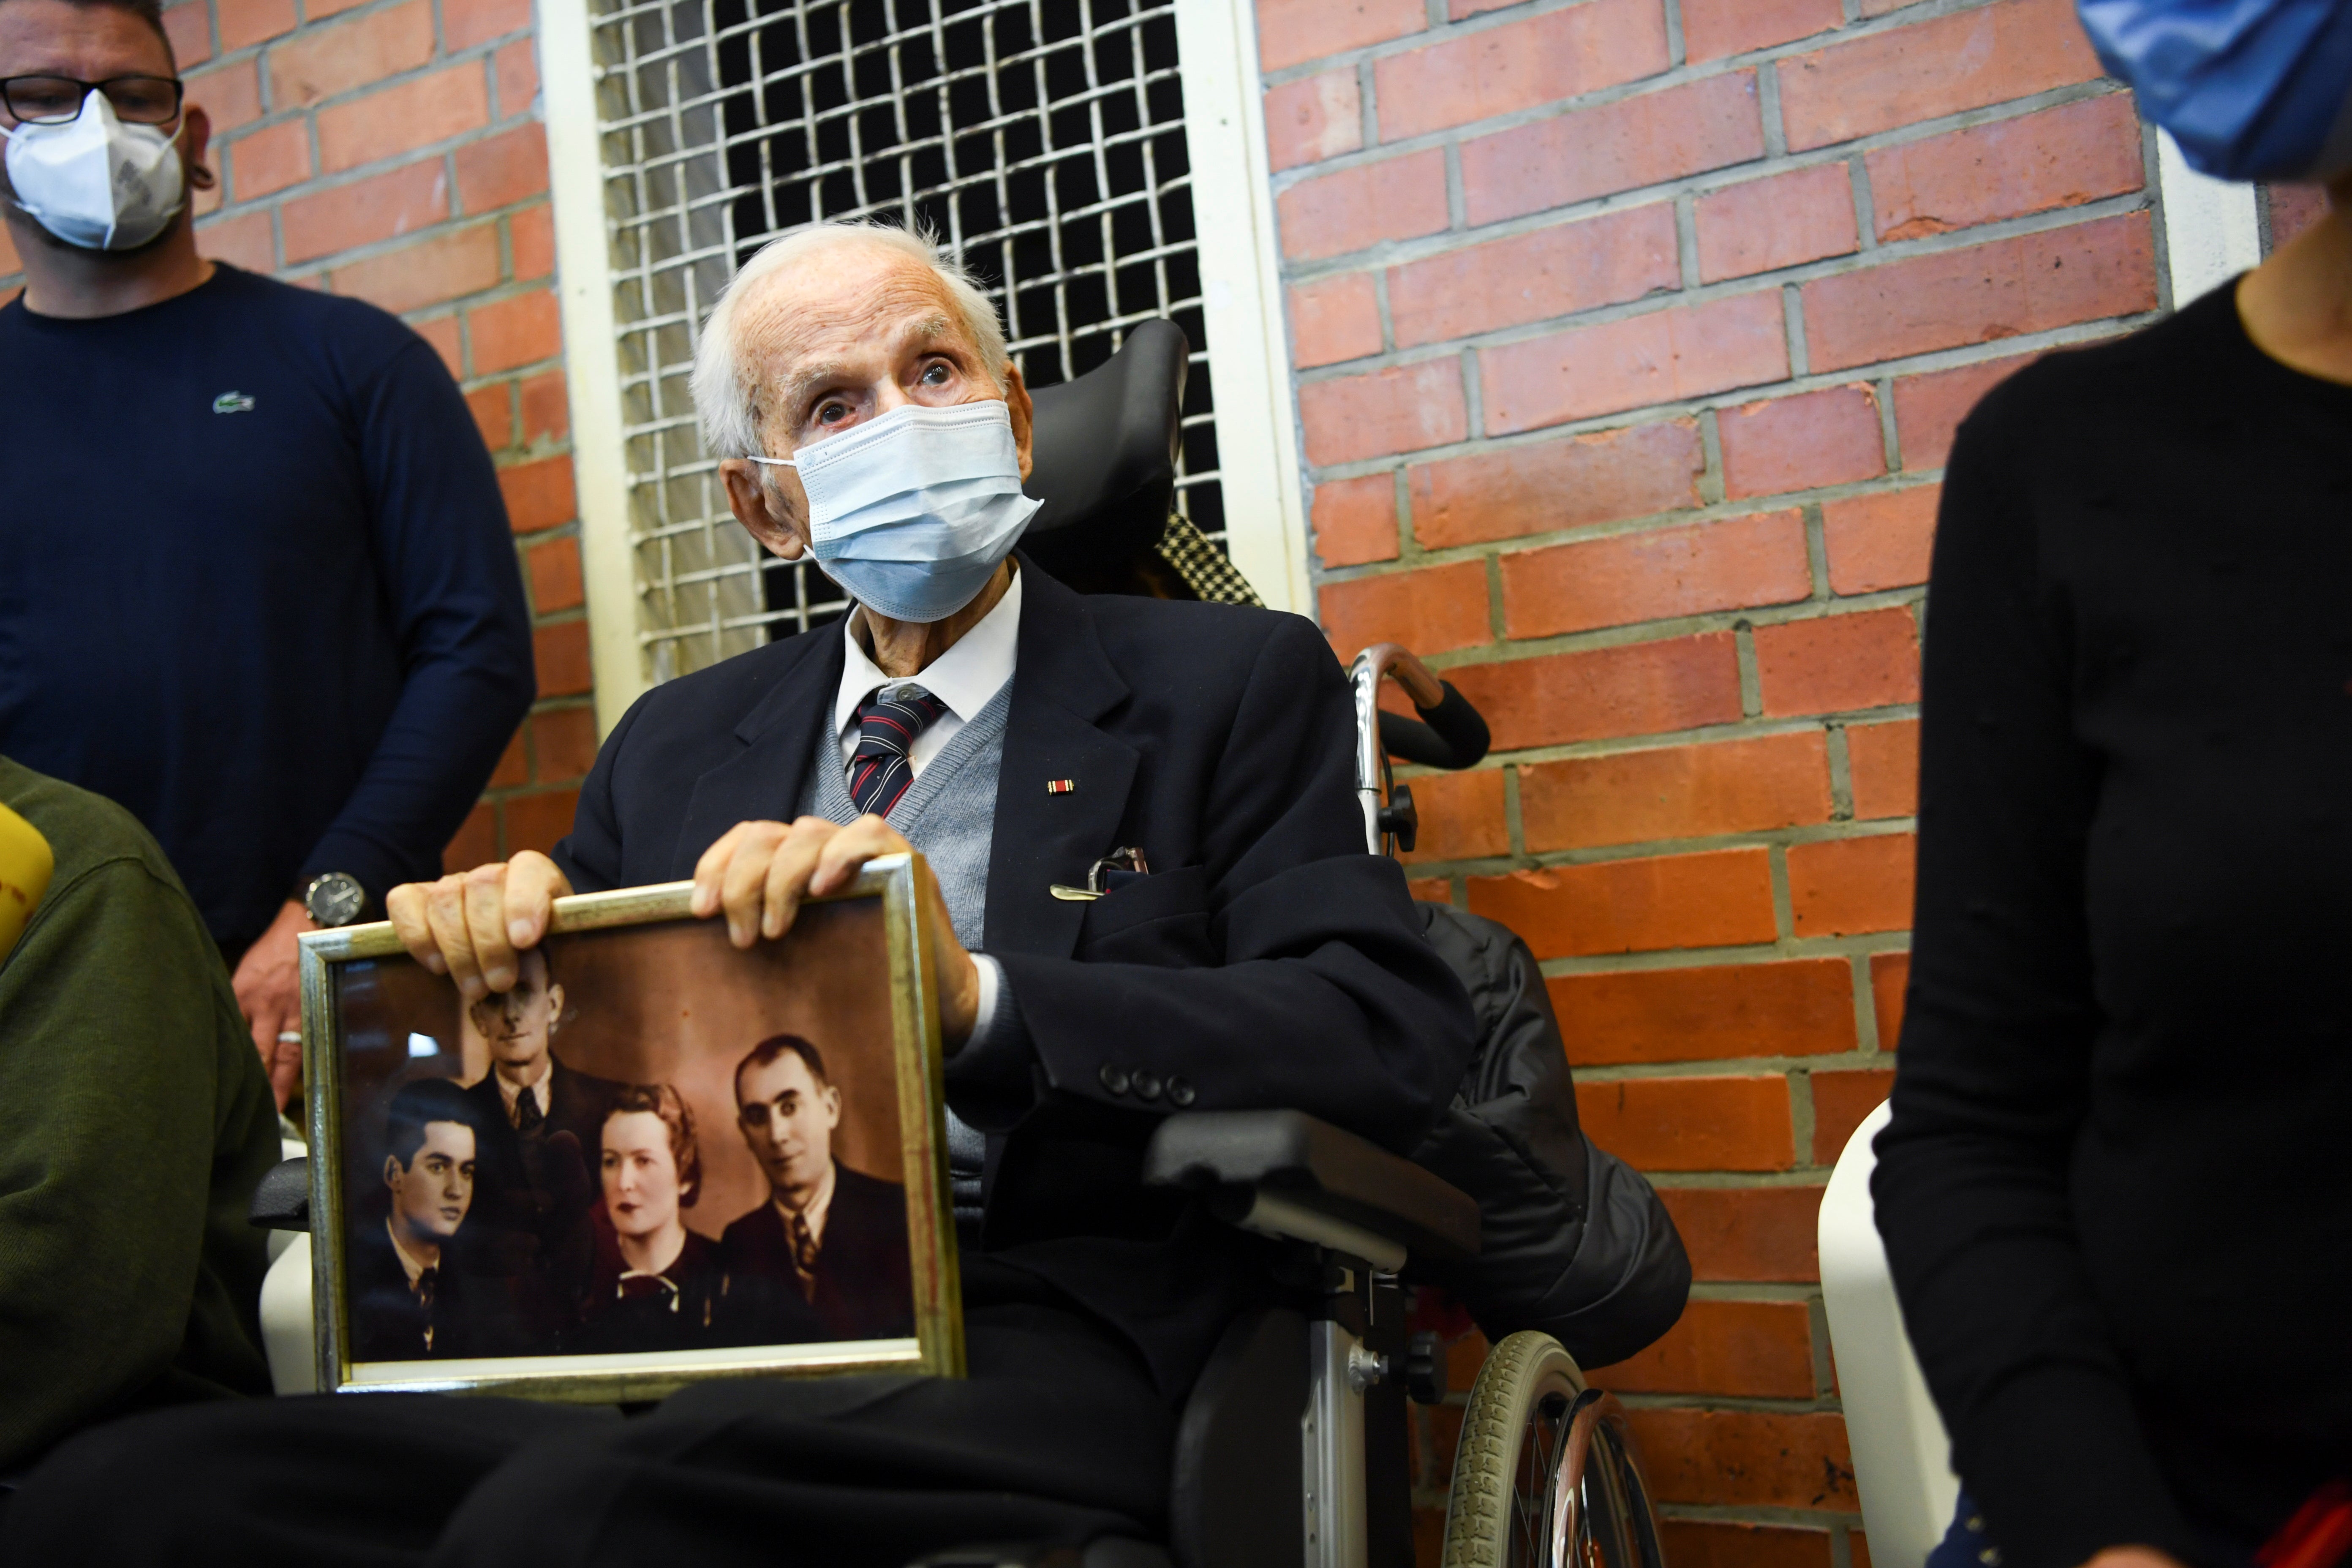 Holocaust survivor Leon Schwarzbaum holds a picture in the courtroom during the trial